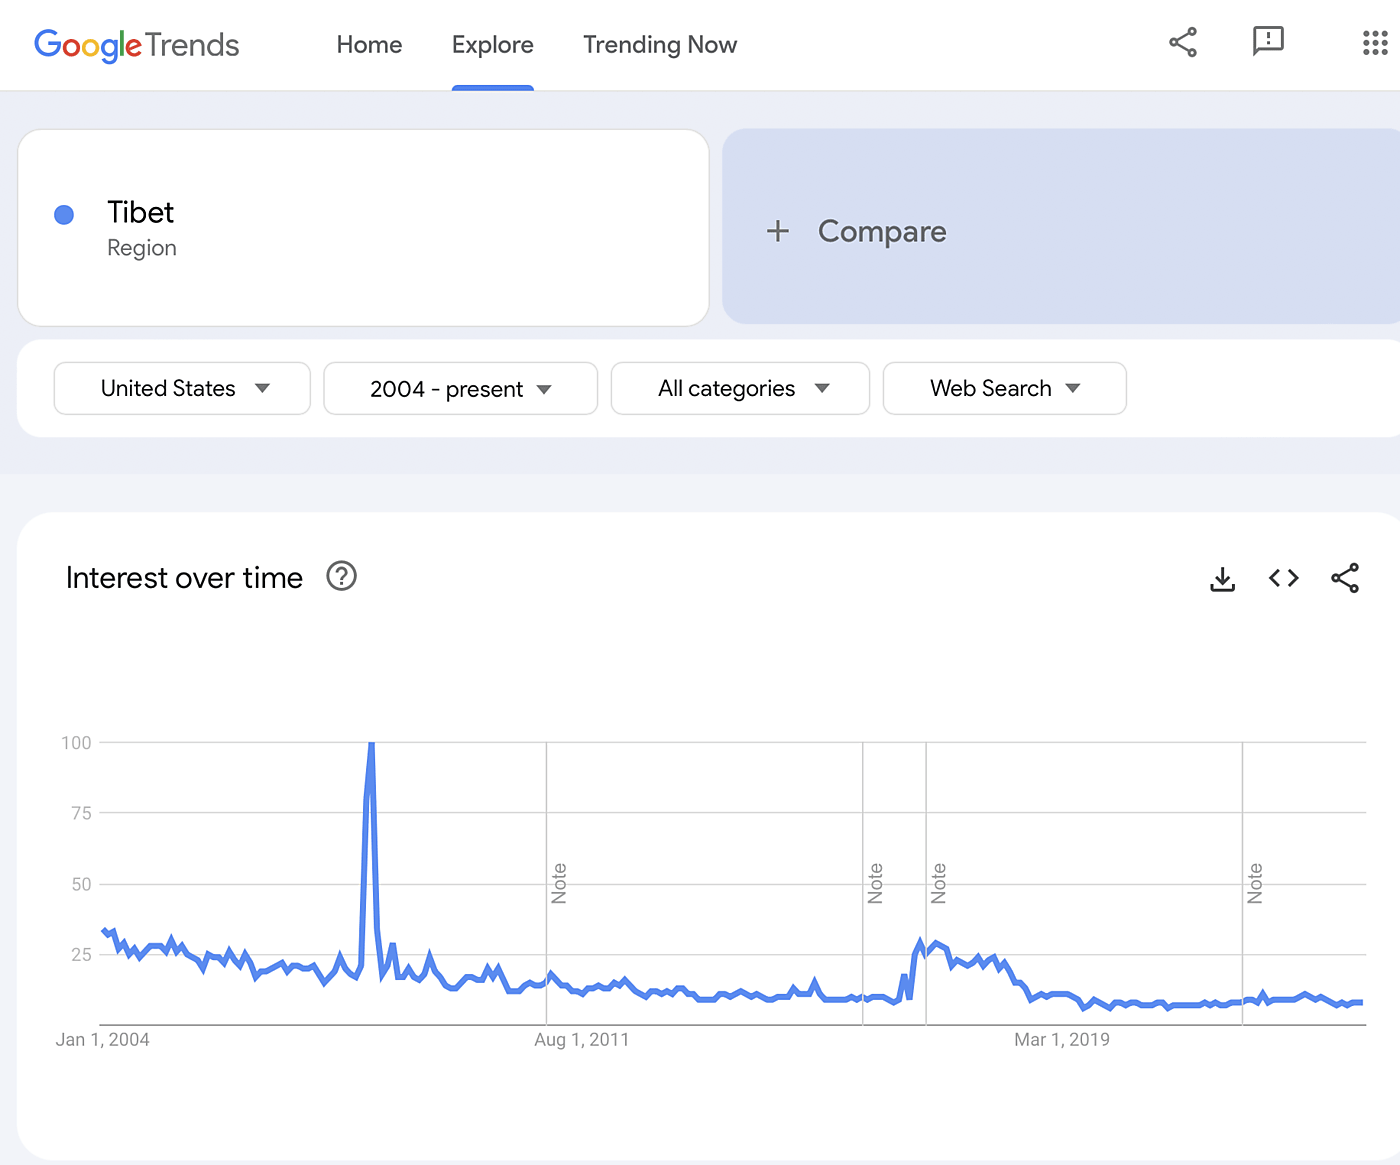 Google trends data for the search term "Tibet" from 2004 to the present.